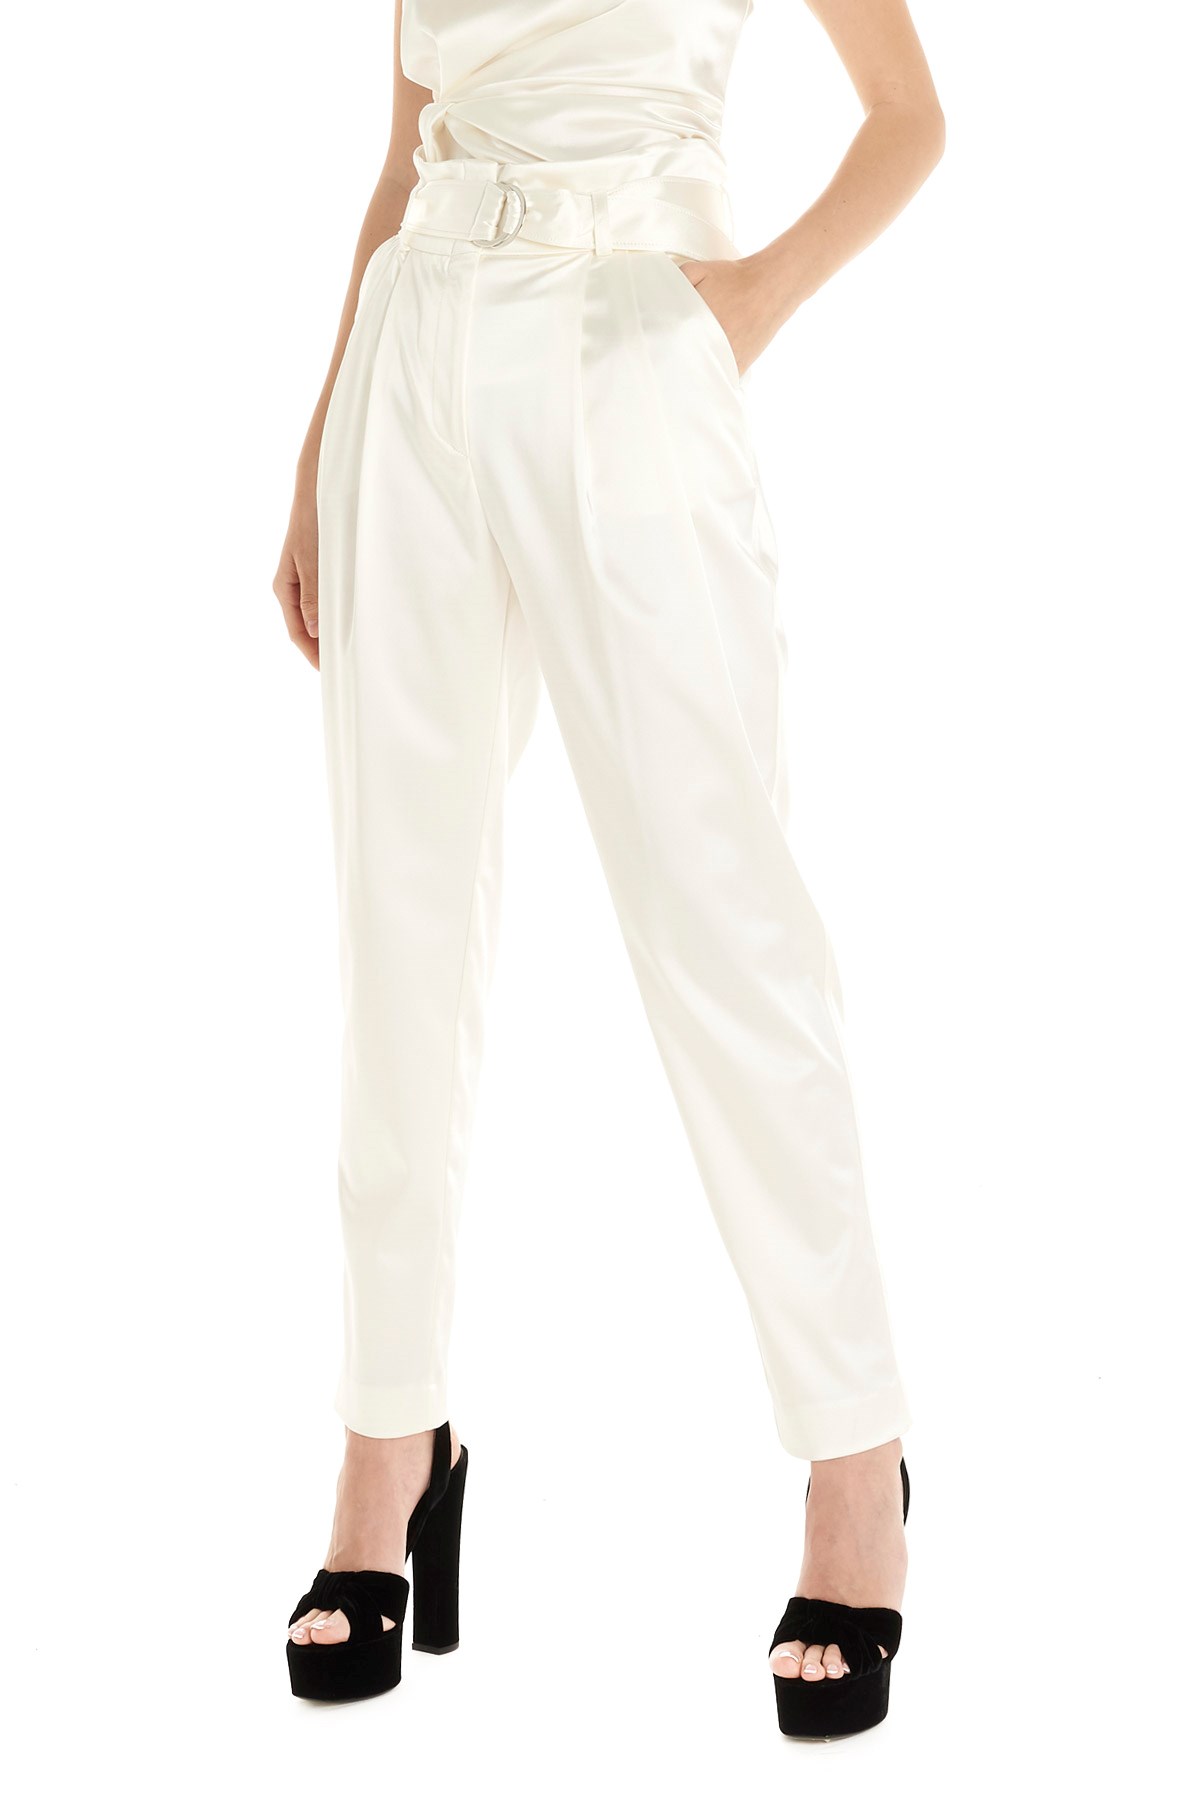 P.A.R.O.S.H. Belted Satin Pants